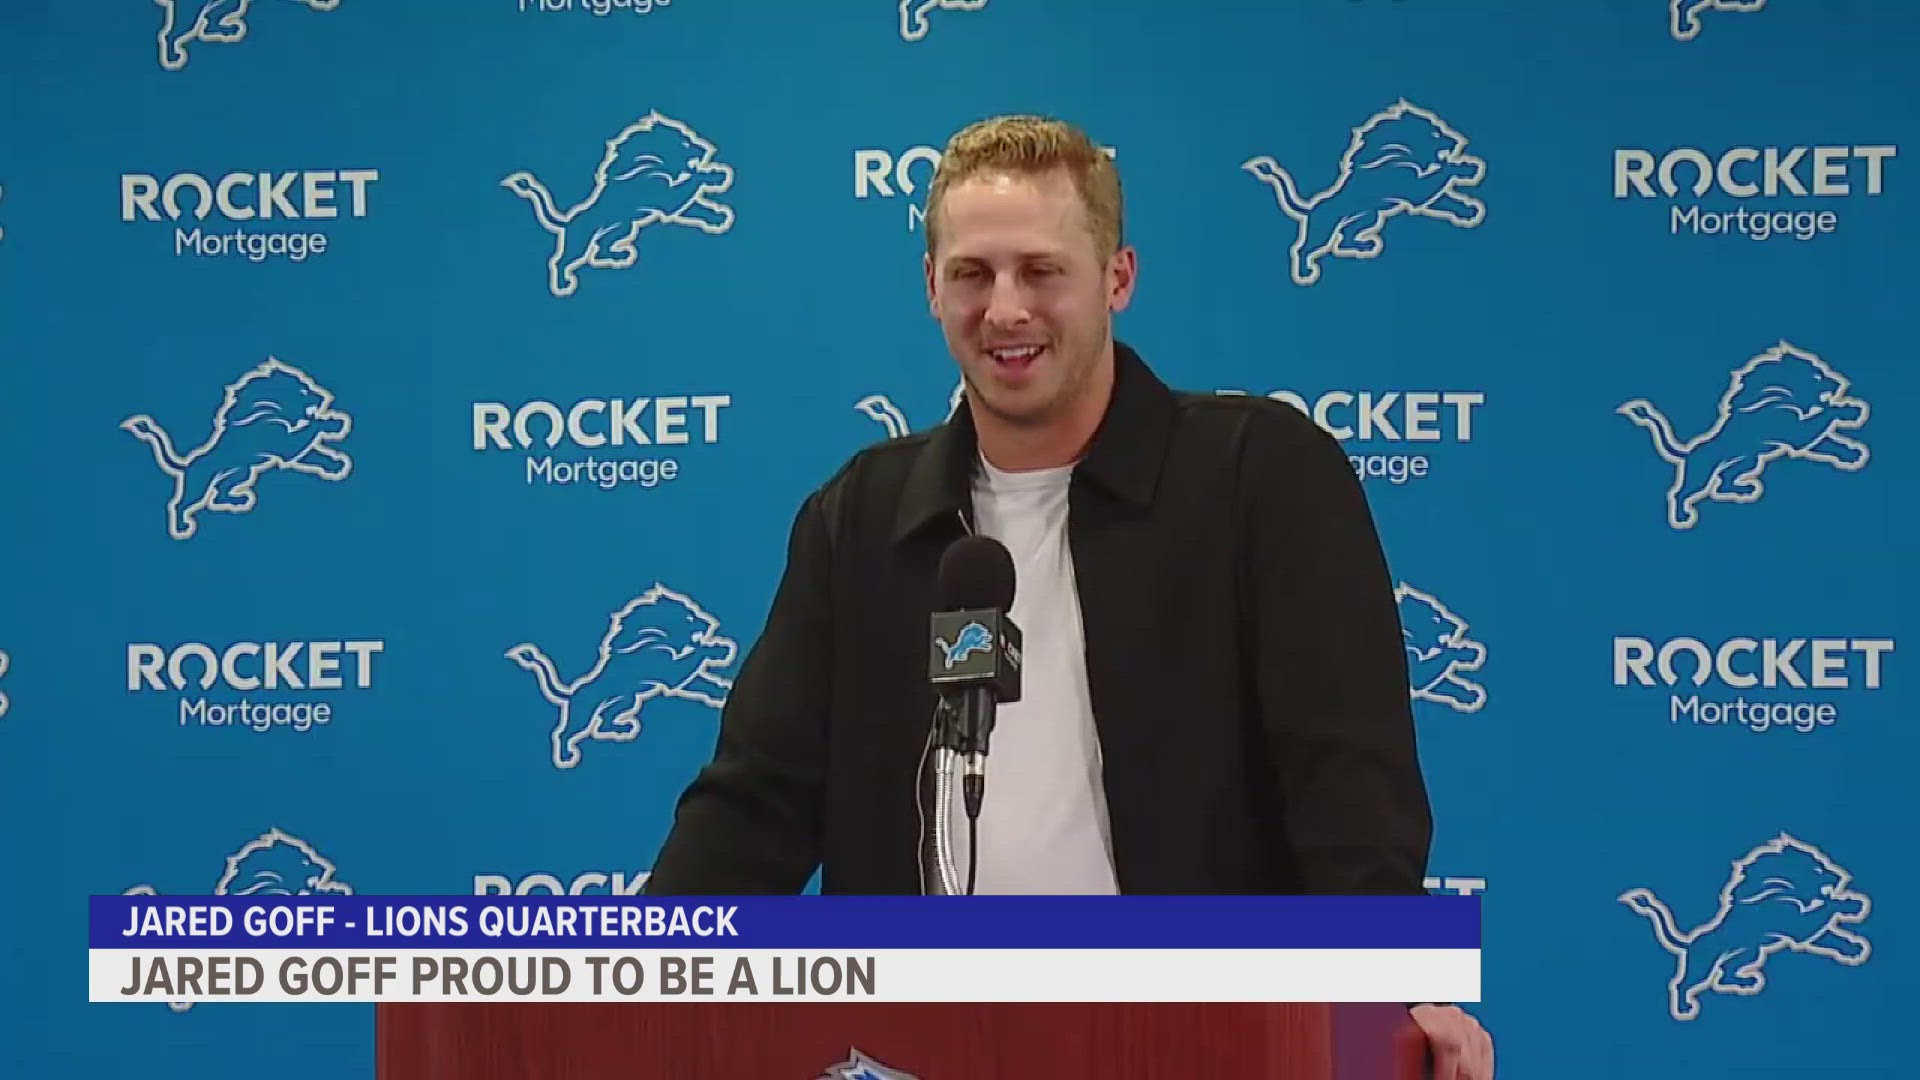 Jared Goff is proud to be a Detroit Lion.